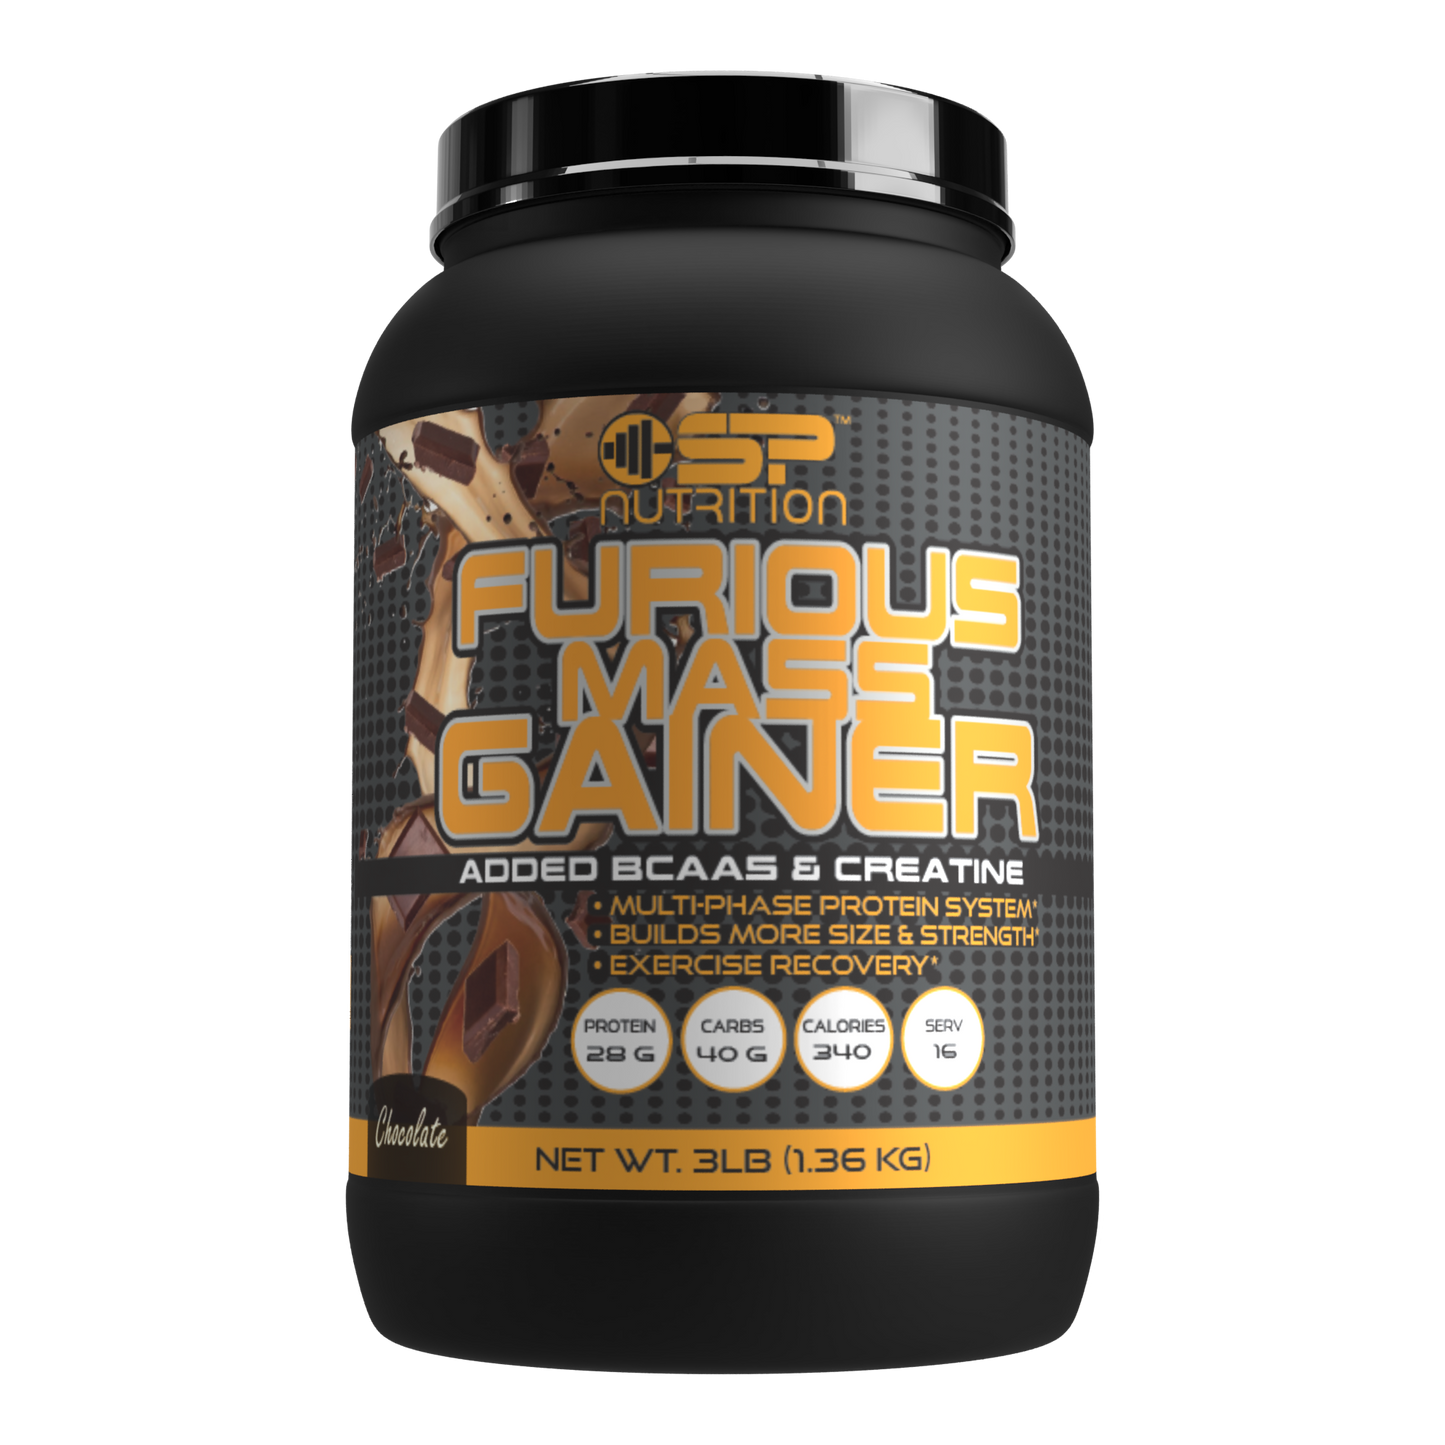 FURIOUS MASS GAINER 3 LBS, Mass Gainer Protein Powder, Gain Strength & Size Quickly, Mixes Easily, Tastes Delicious.